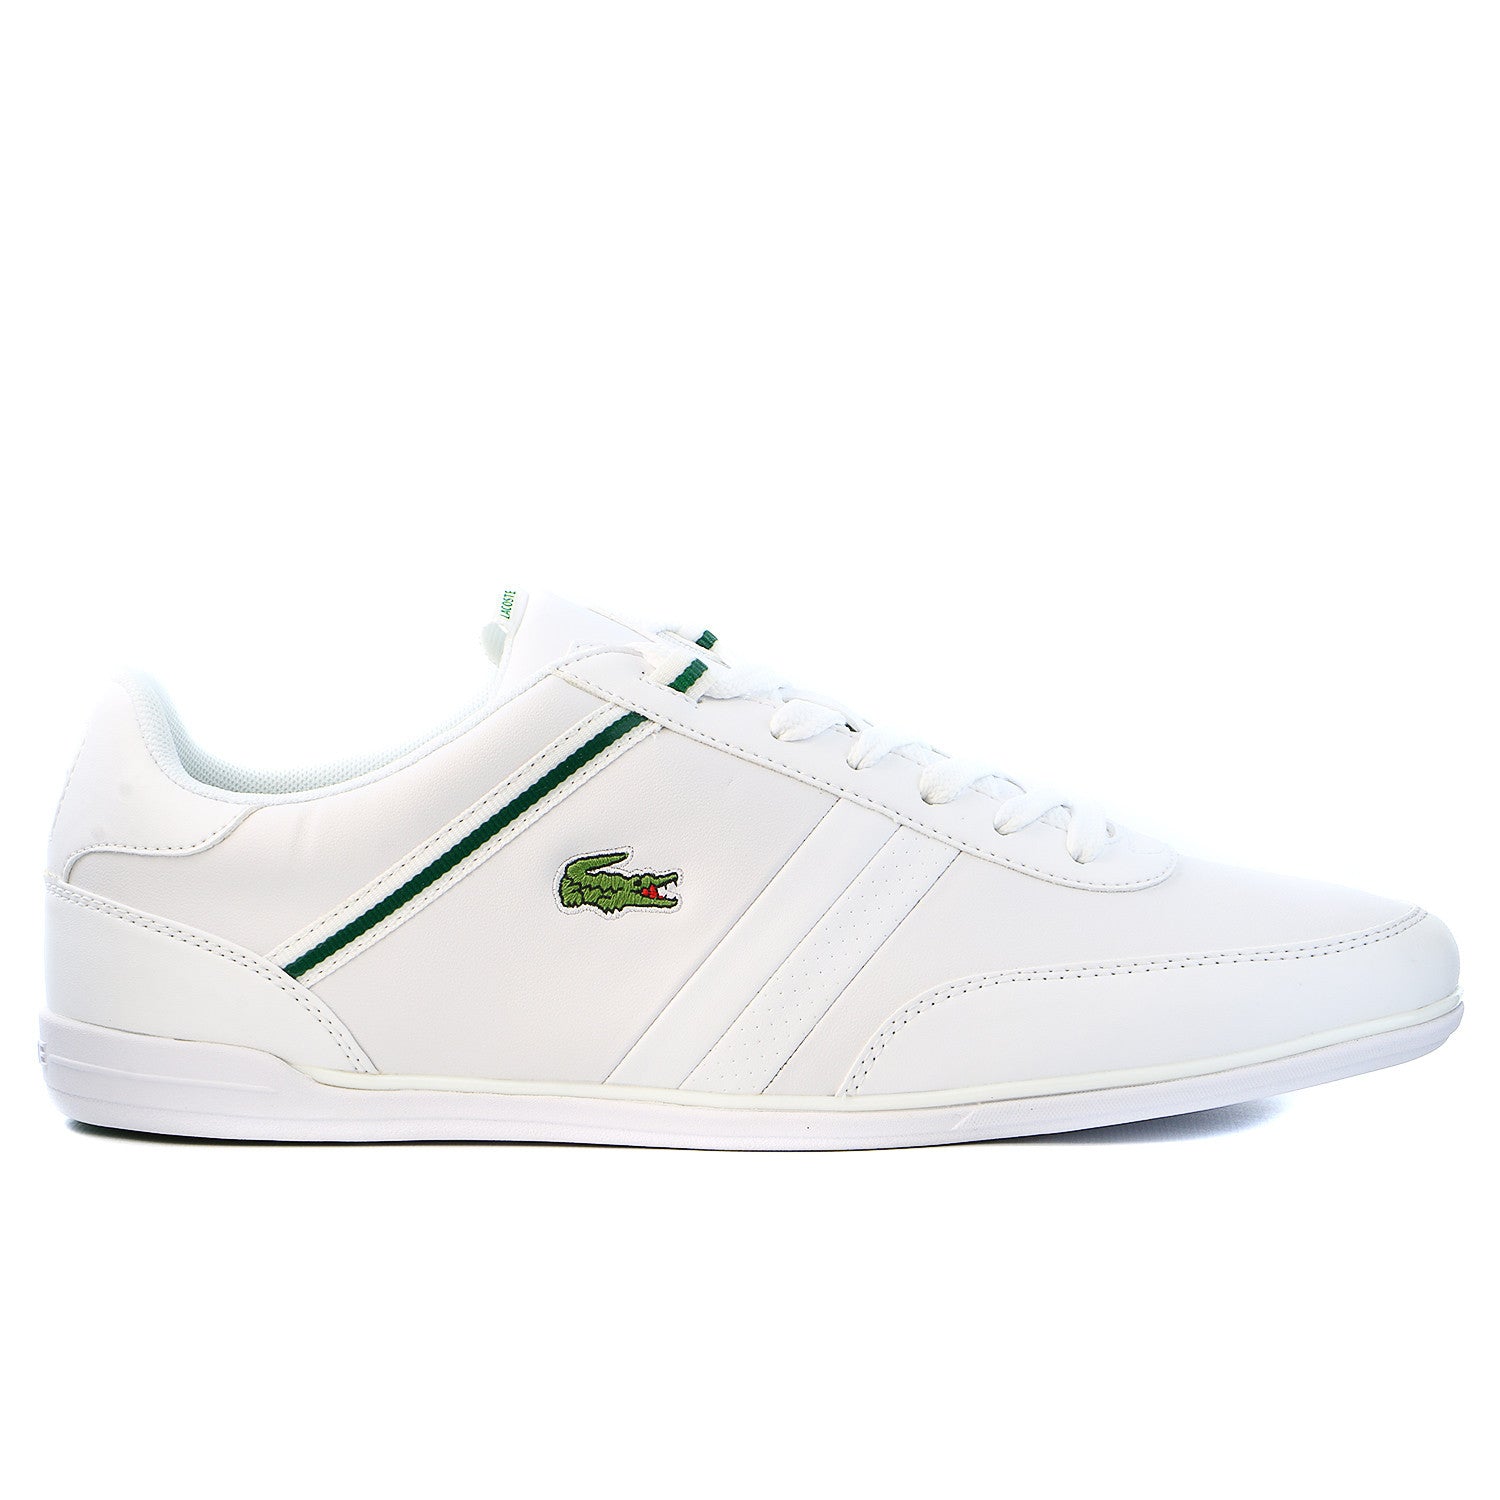 the bay lacoste shoes